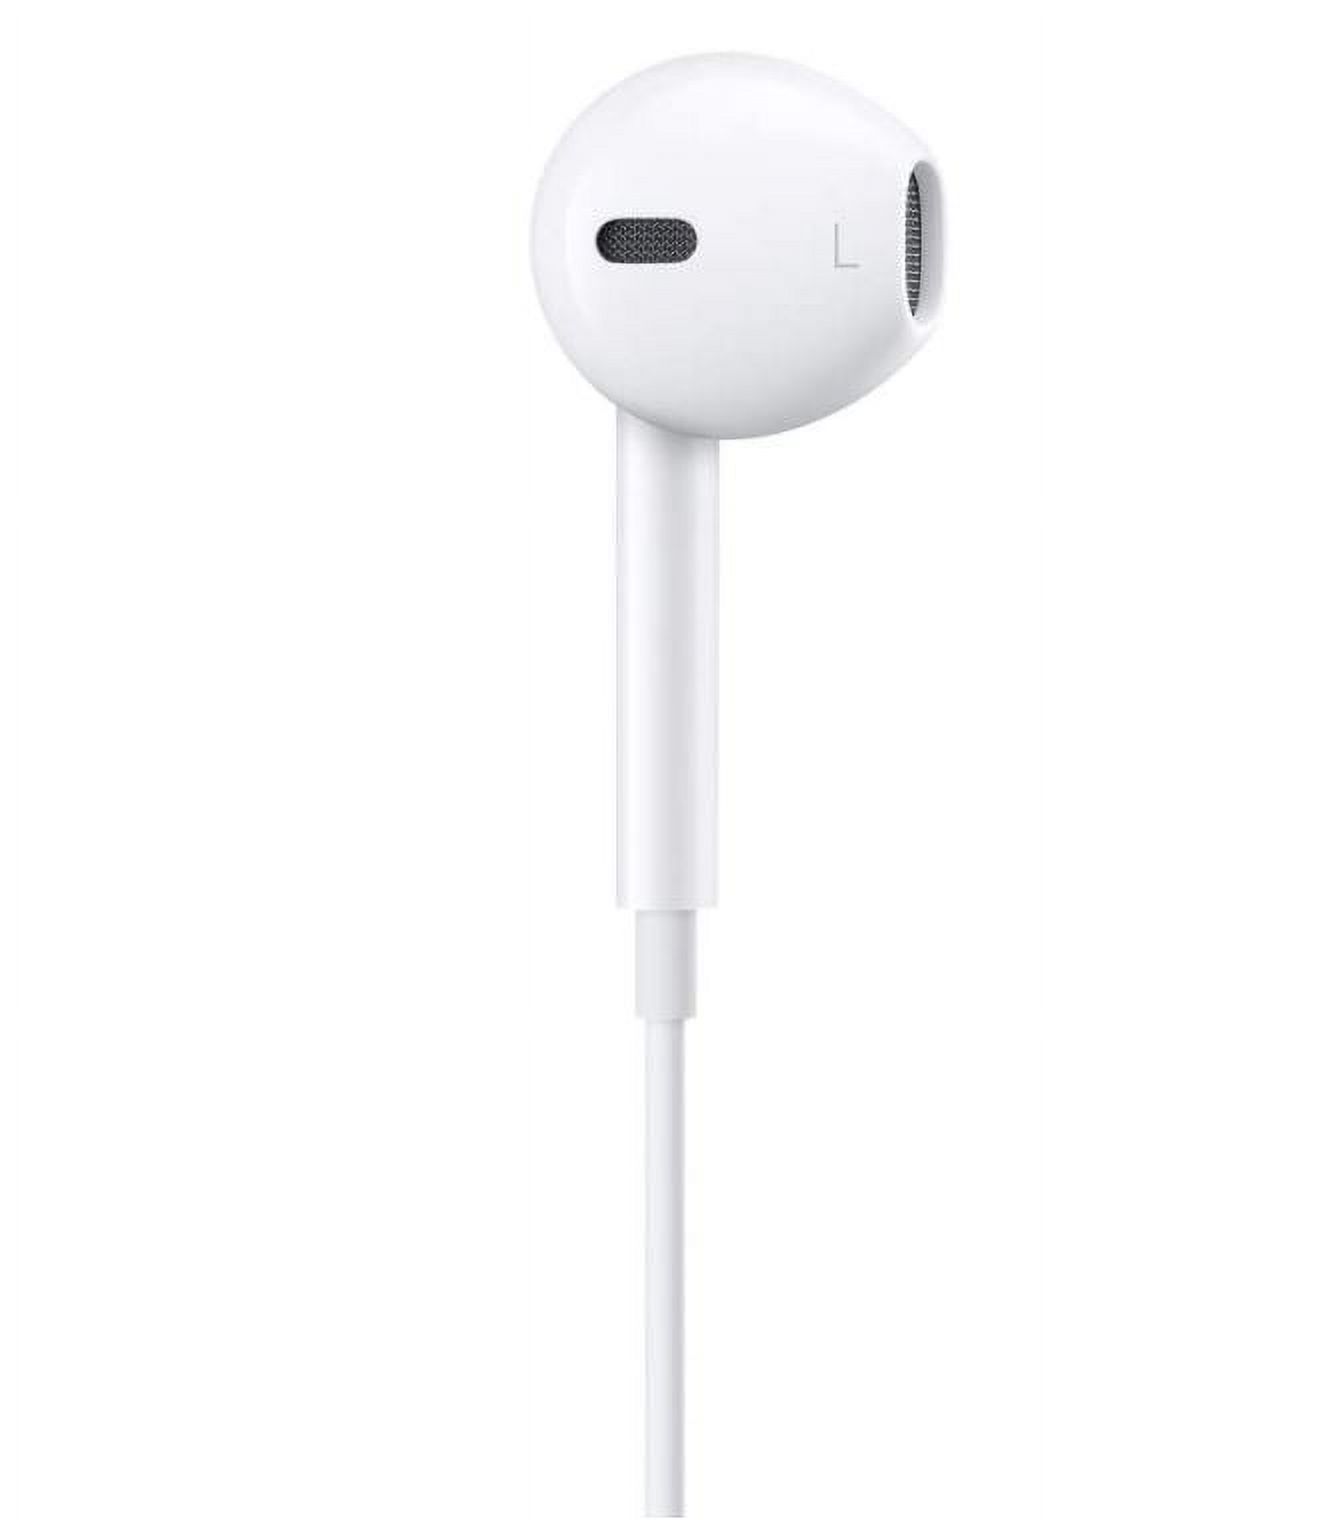 Apple In-Ear Headphones, White, MD827LL/A - image 4 of 4